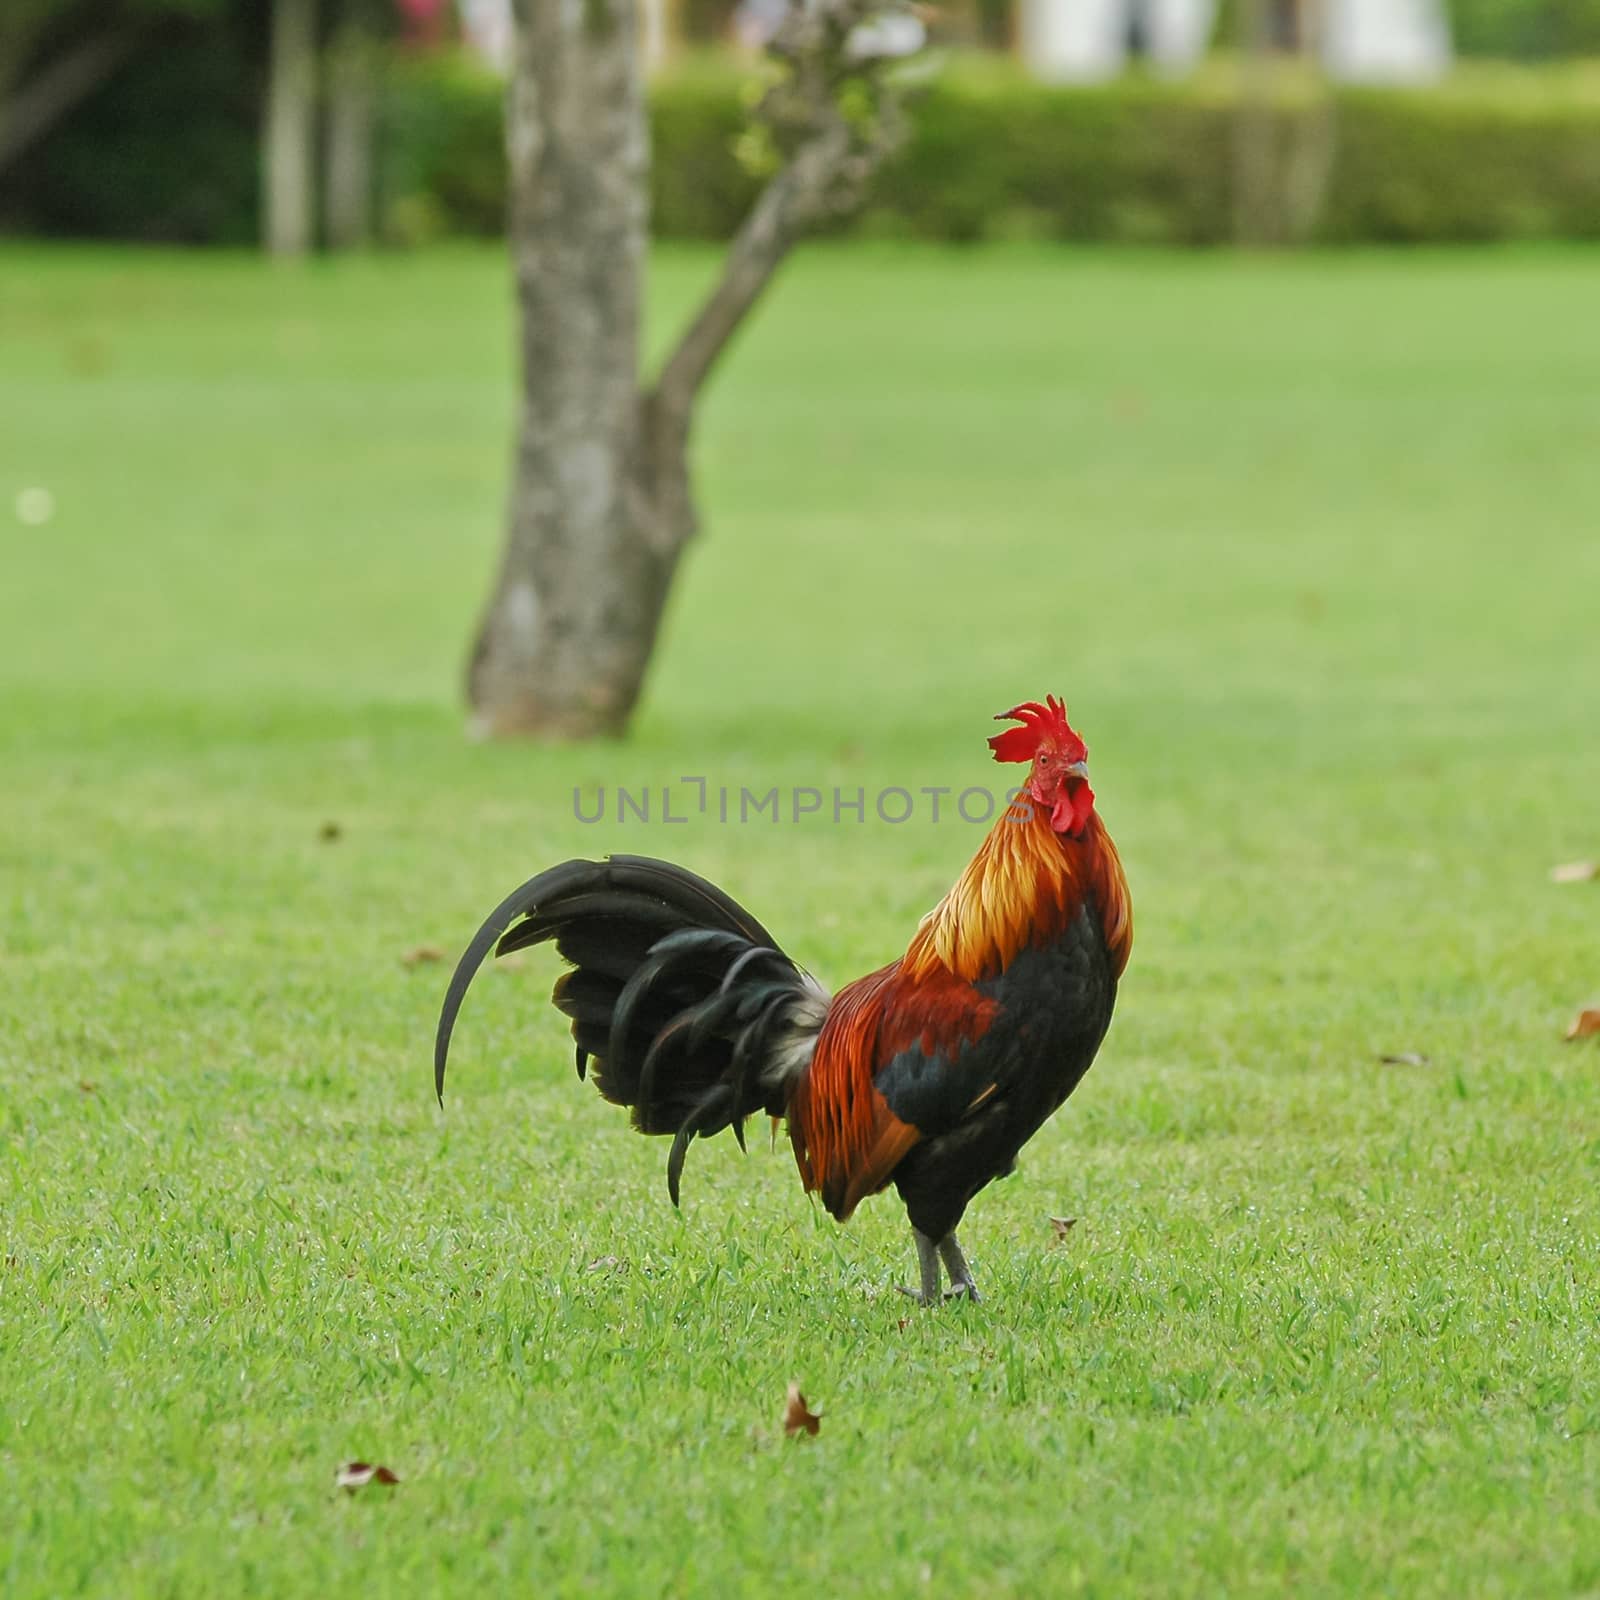 Lively chicken on the grass